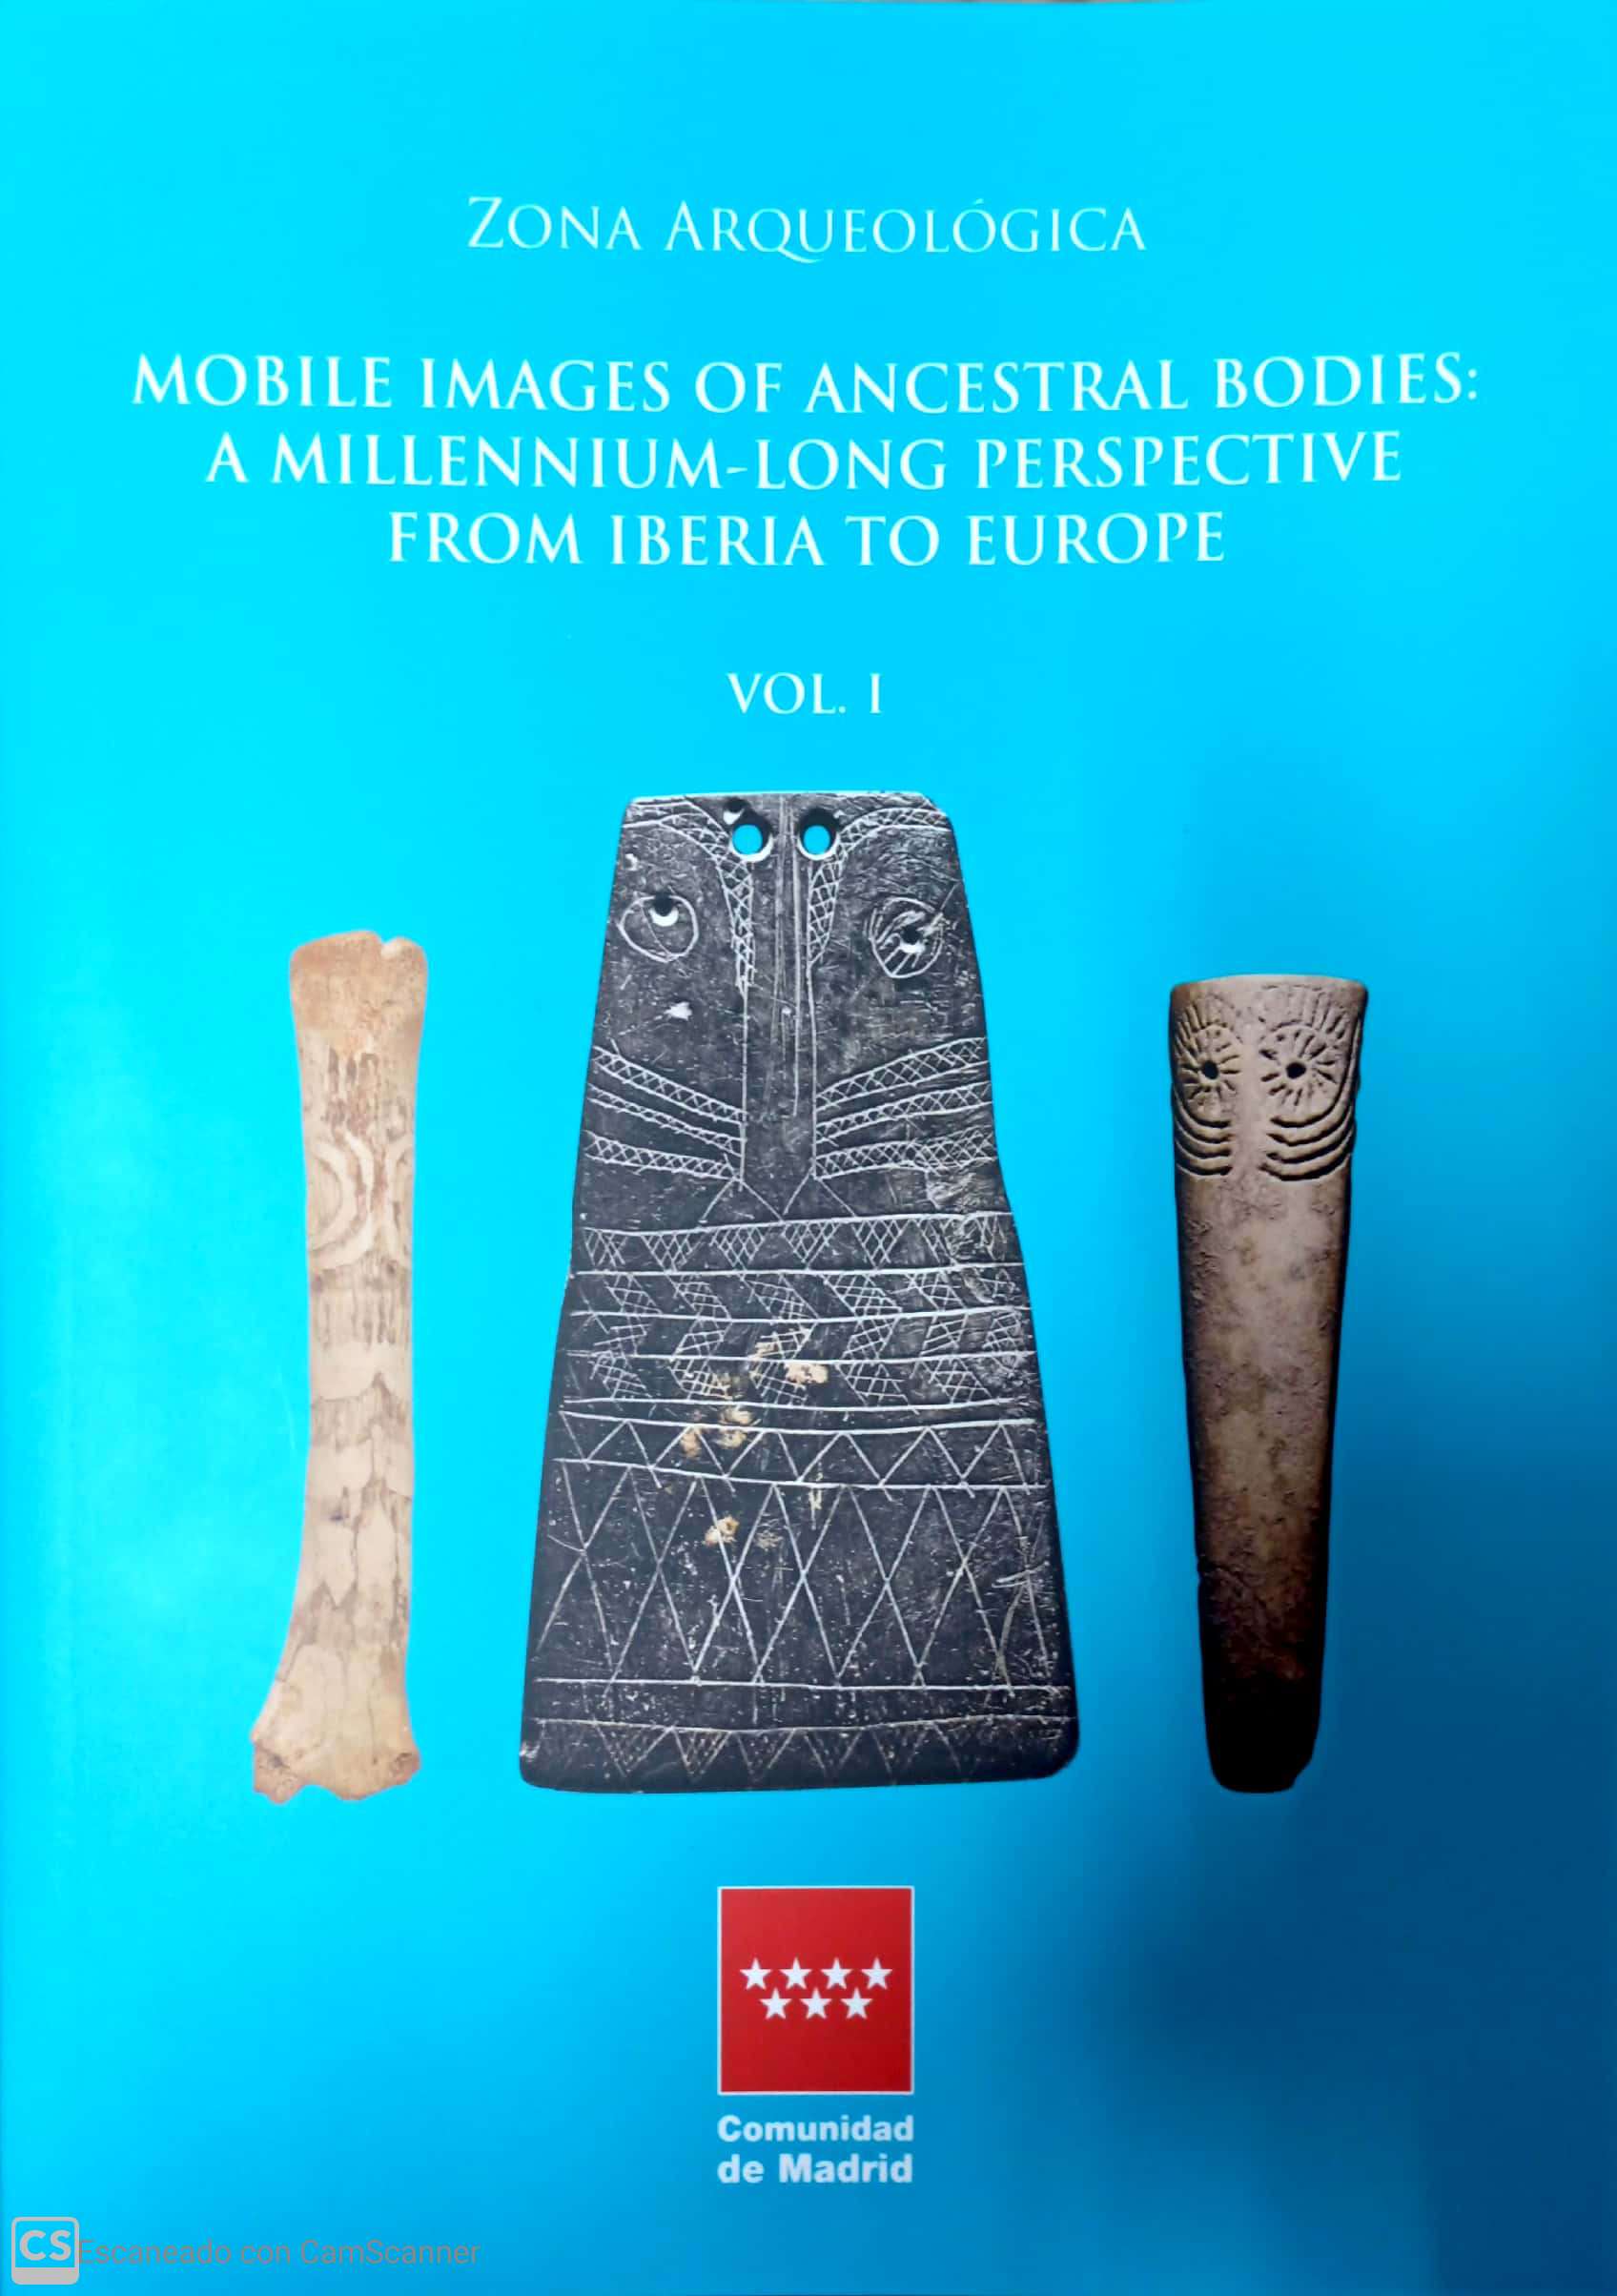 Mobile Images of the ancestral bodies